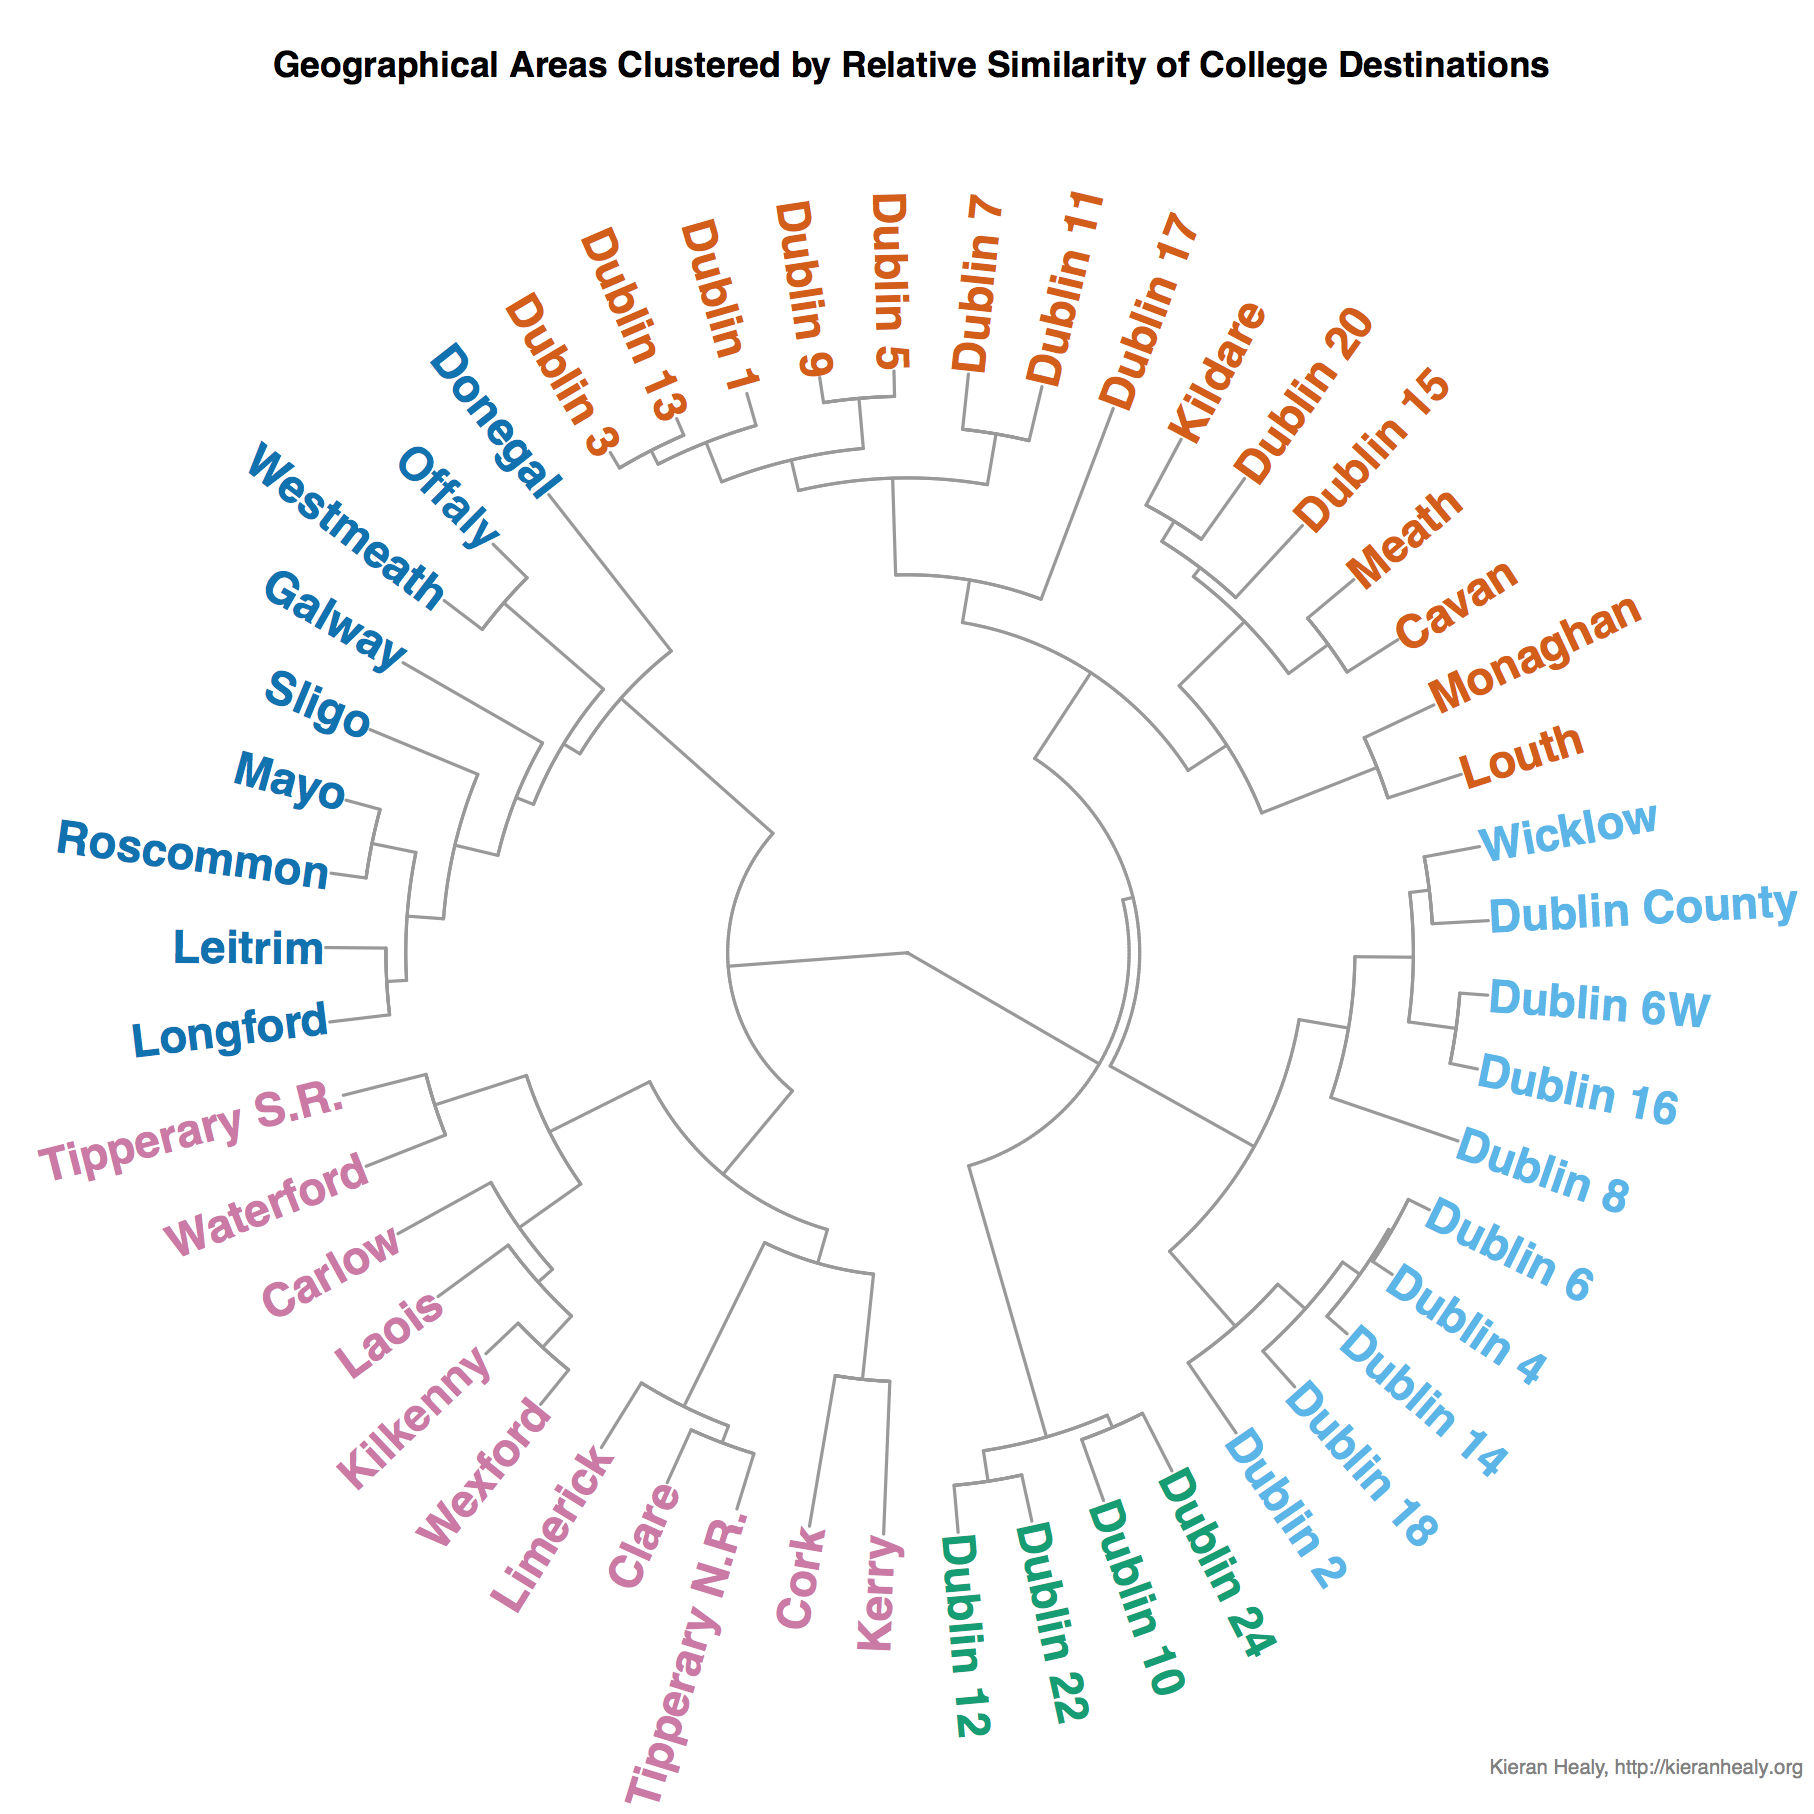 Irish Geographic Areas Clustered by Relative Similarity of College Destinations